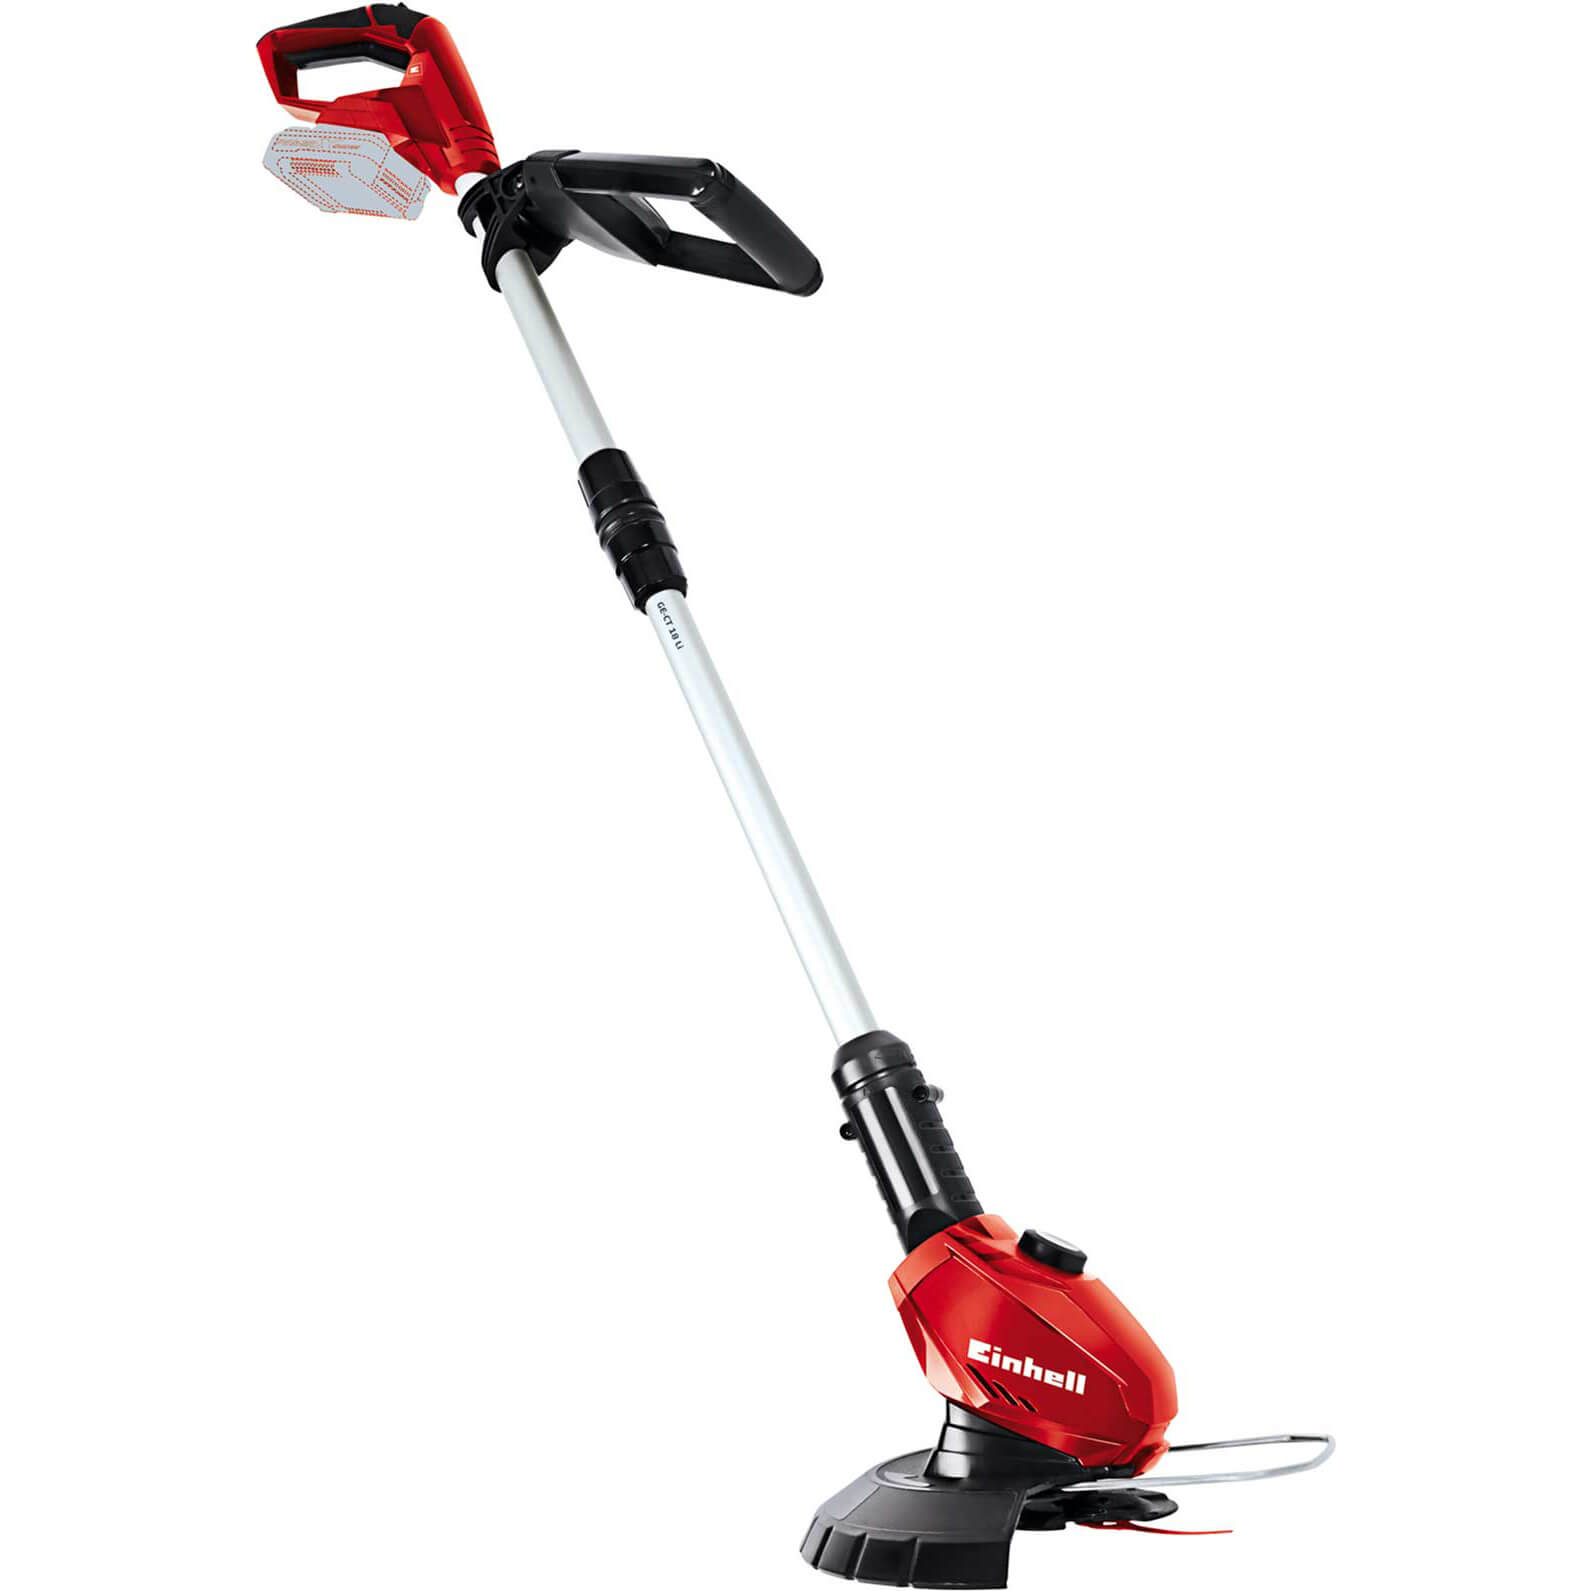 Image of Einhell GE-CT 18 Li 18v Cordless Telescopic Grass Trimmer and Edger 240mm No Batteries No Charger